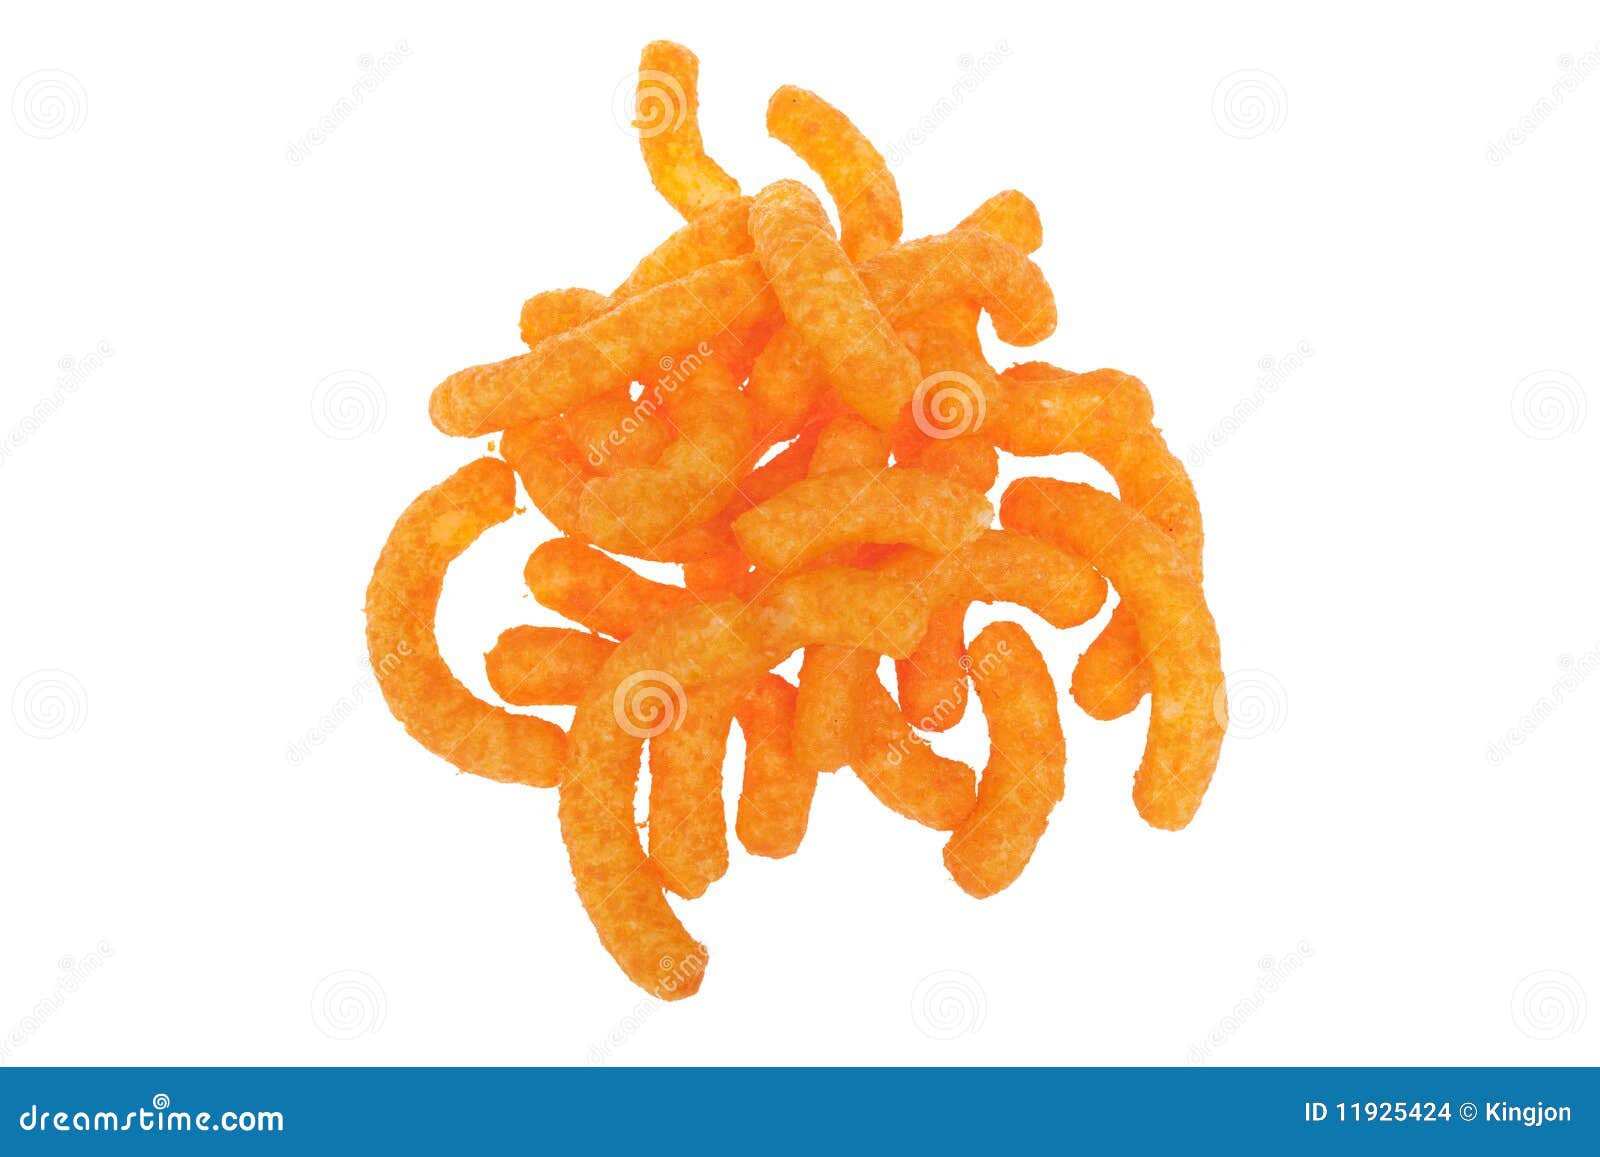 Cheese Puffs On White Background Stock Images - Image: 11925424